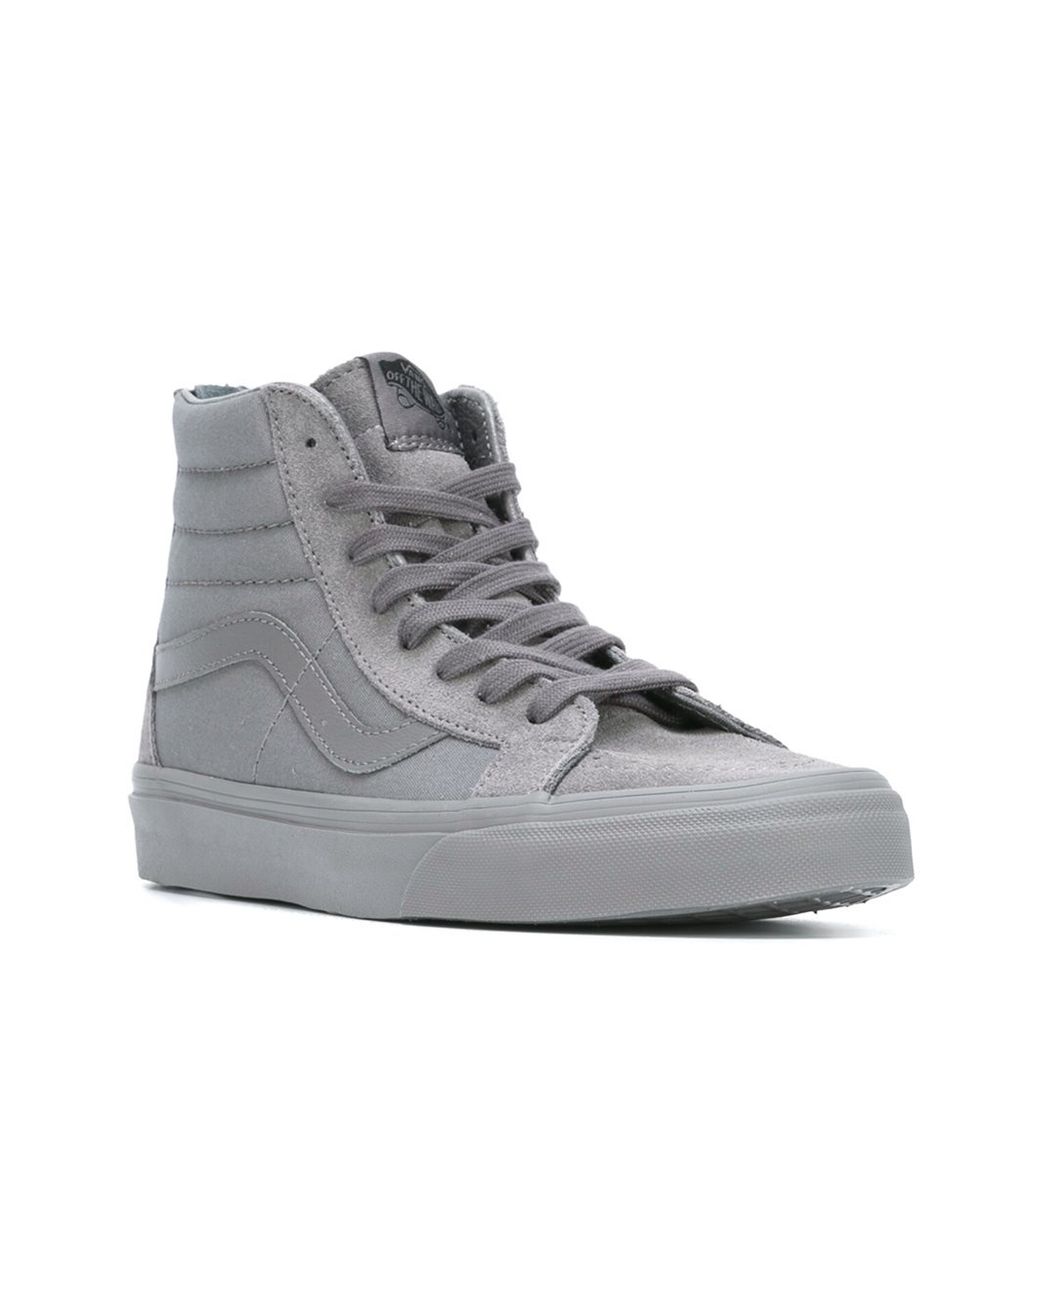 Vans Cotton 'Monochrome Pack' High-Tops in Grey (Gray) for Men | Lyst